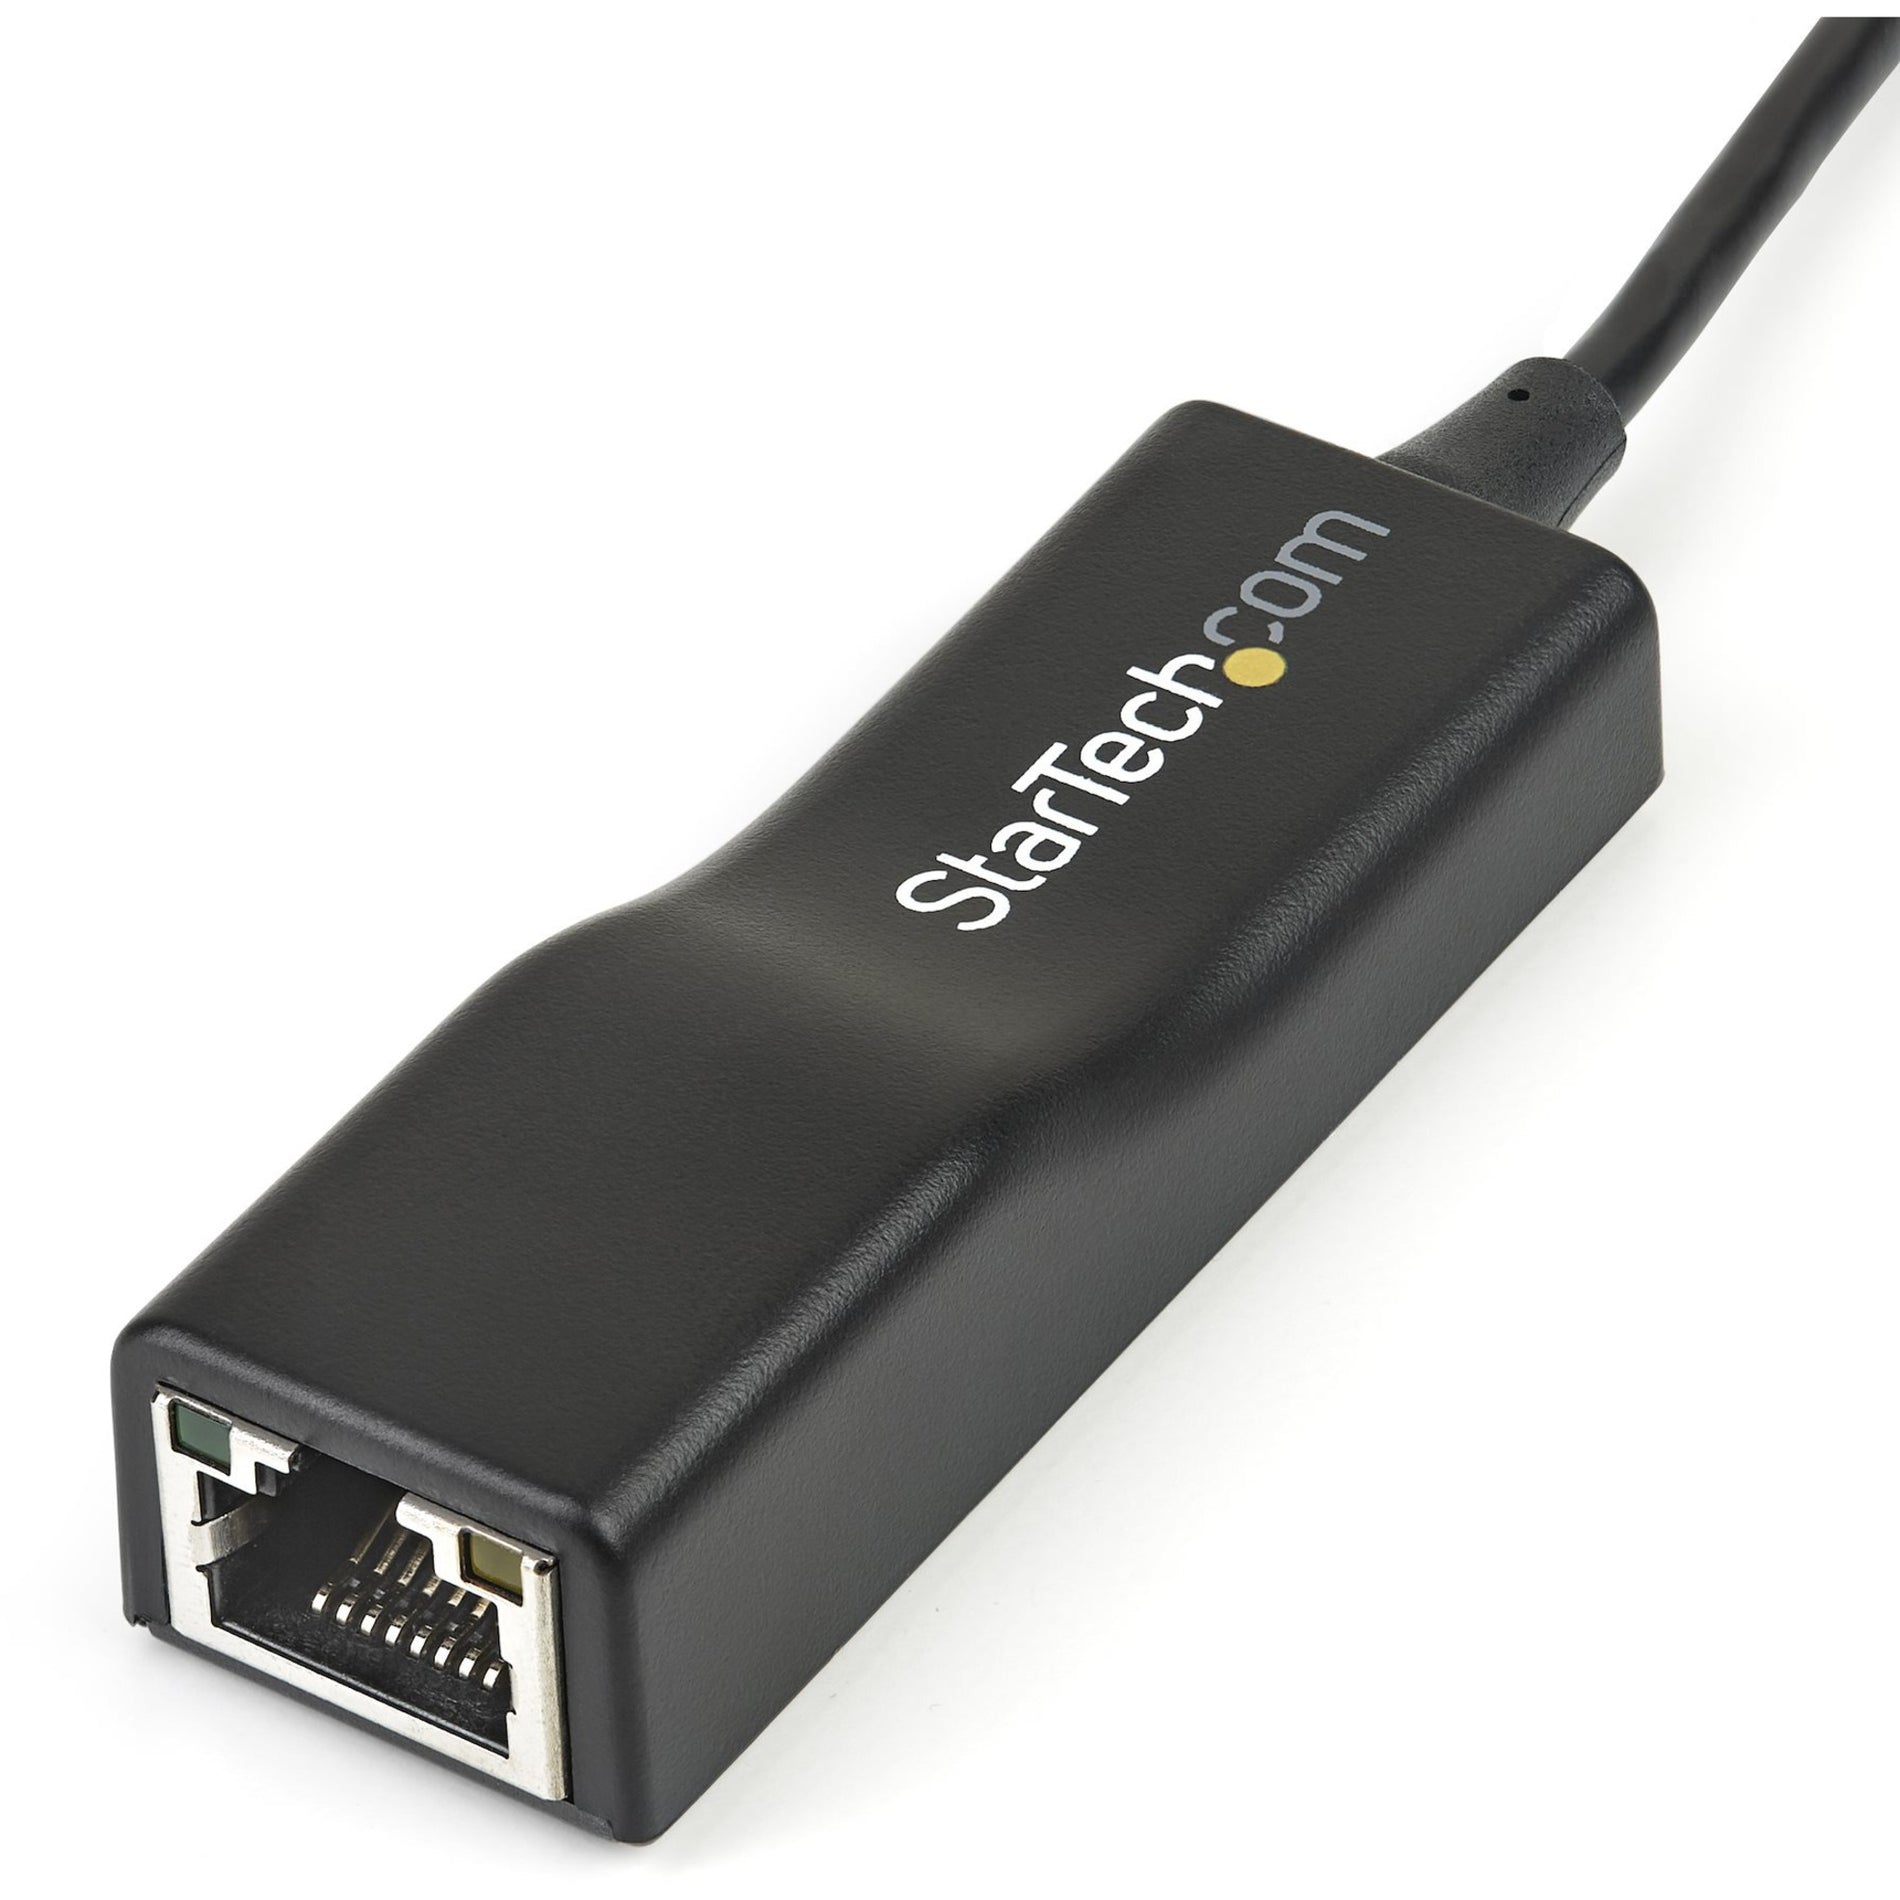 StarTech.com USB2100 USB 2.0 to 10/100 Mbps Ethernet Network Adapter Dongle, Easy Plug-and-Play Internet Connection